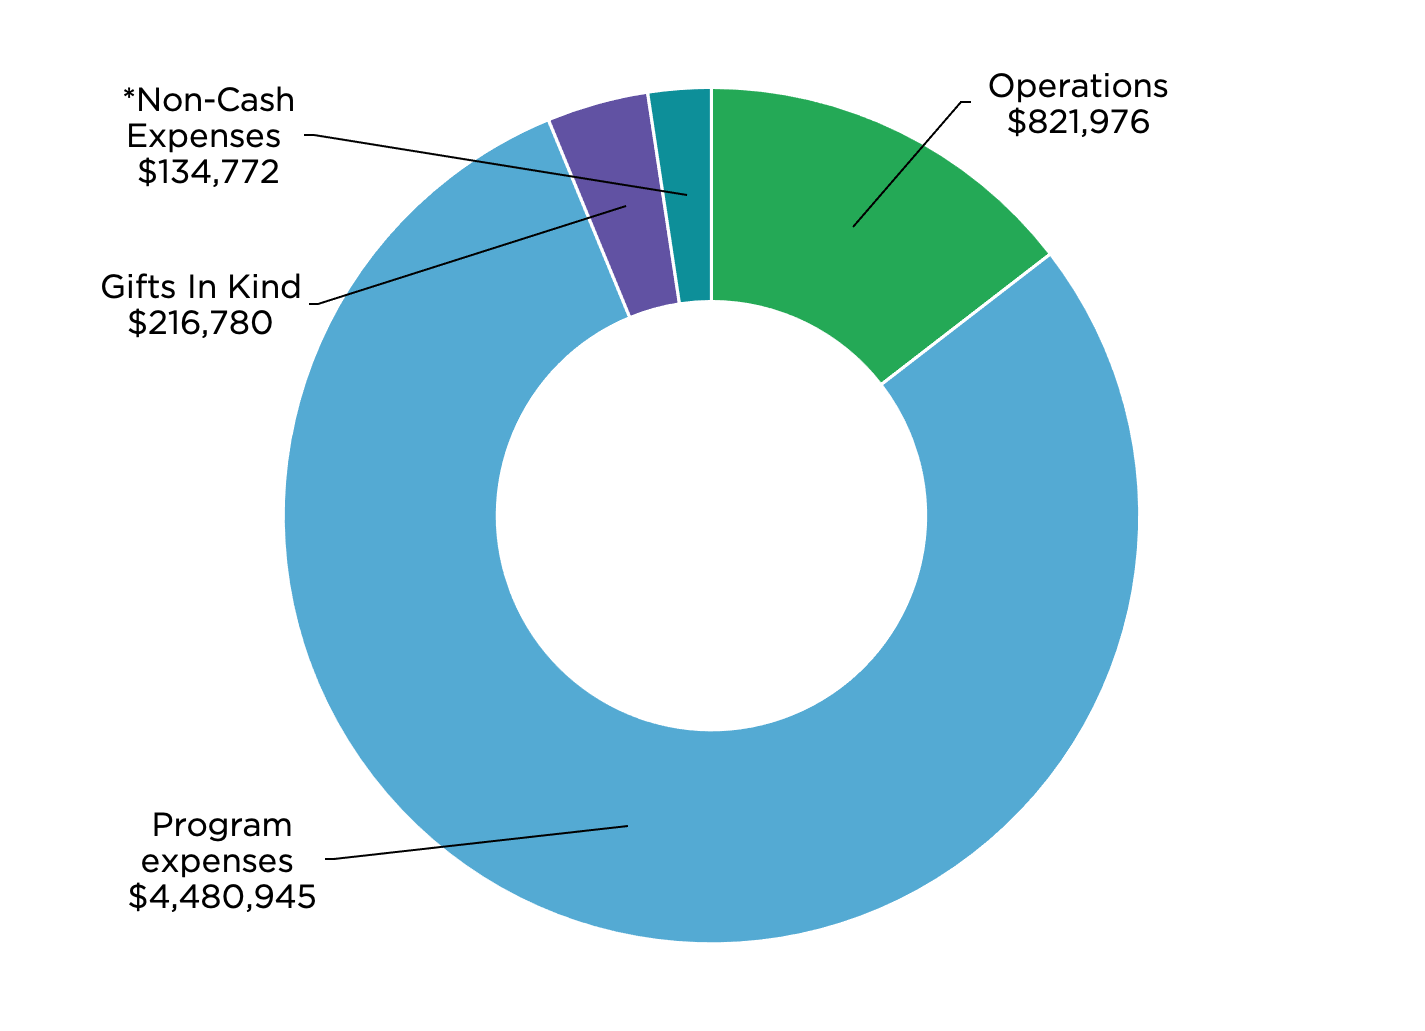 Pie chart of donation usage, categorized by: expenses, operations, gifts and non-cash expenses